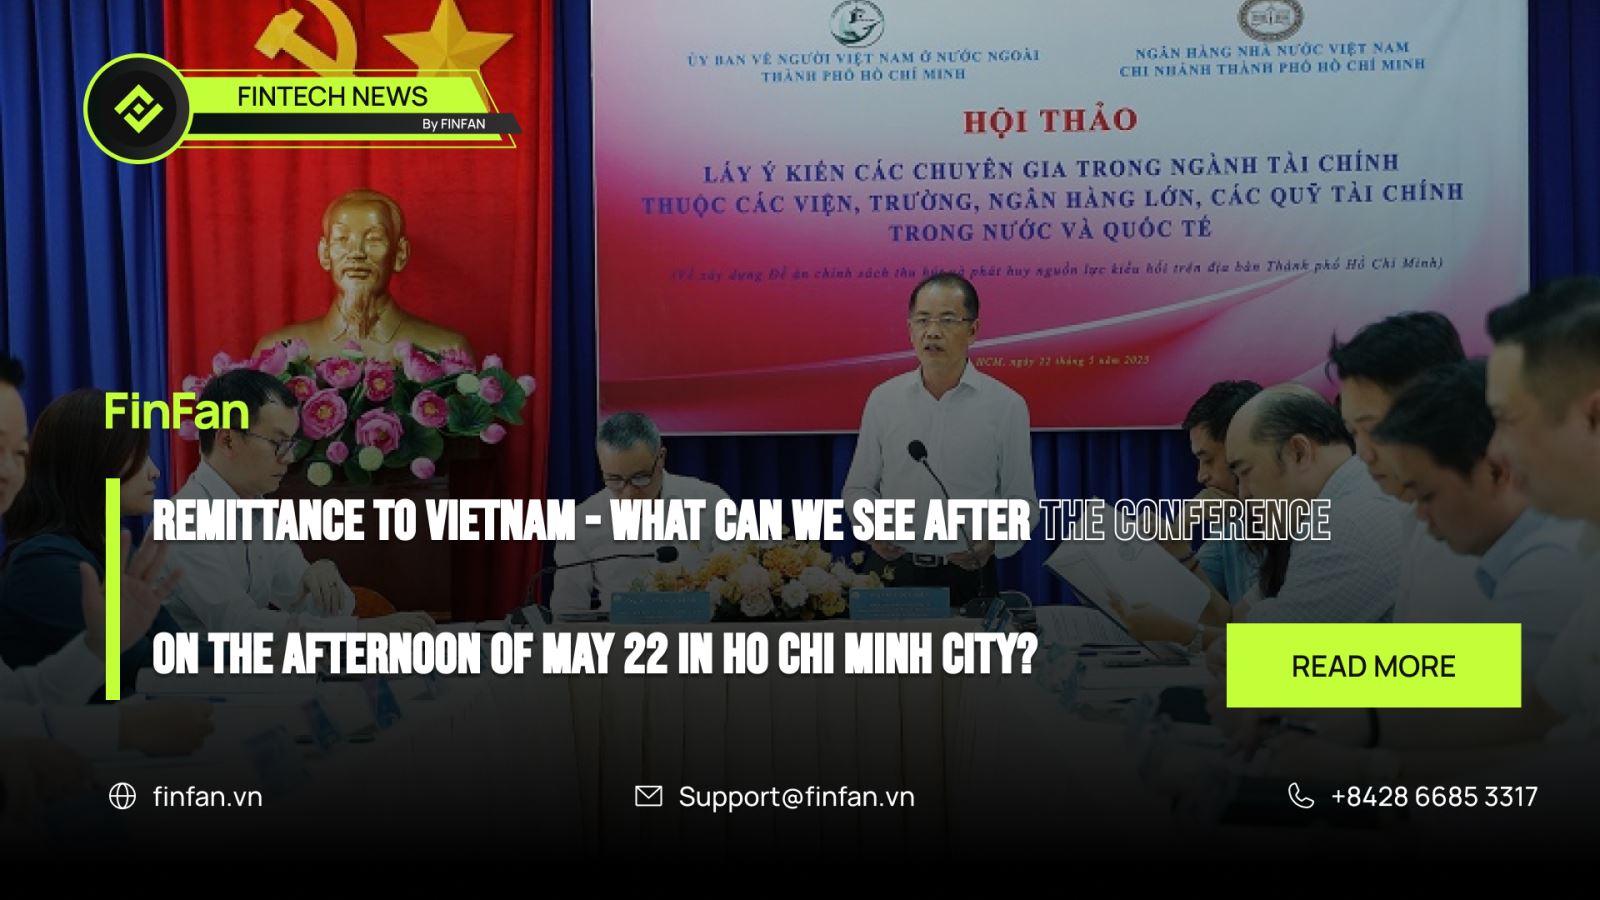 Remittances to Vietnam - What can we see after the conference on the afternoon of May 22 in Ho Chi Minh City?